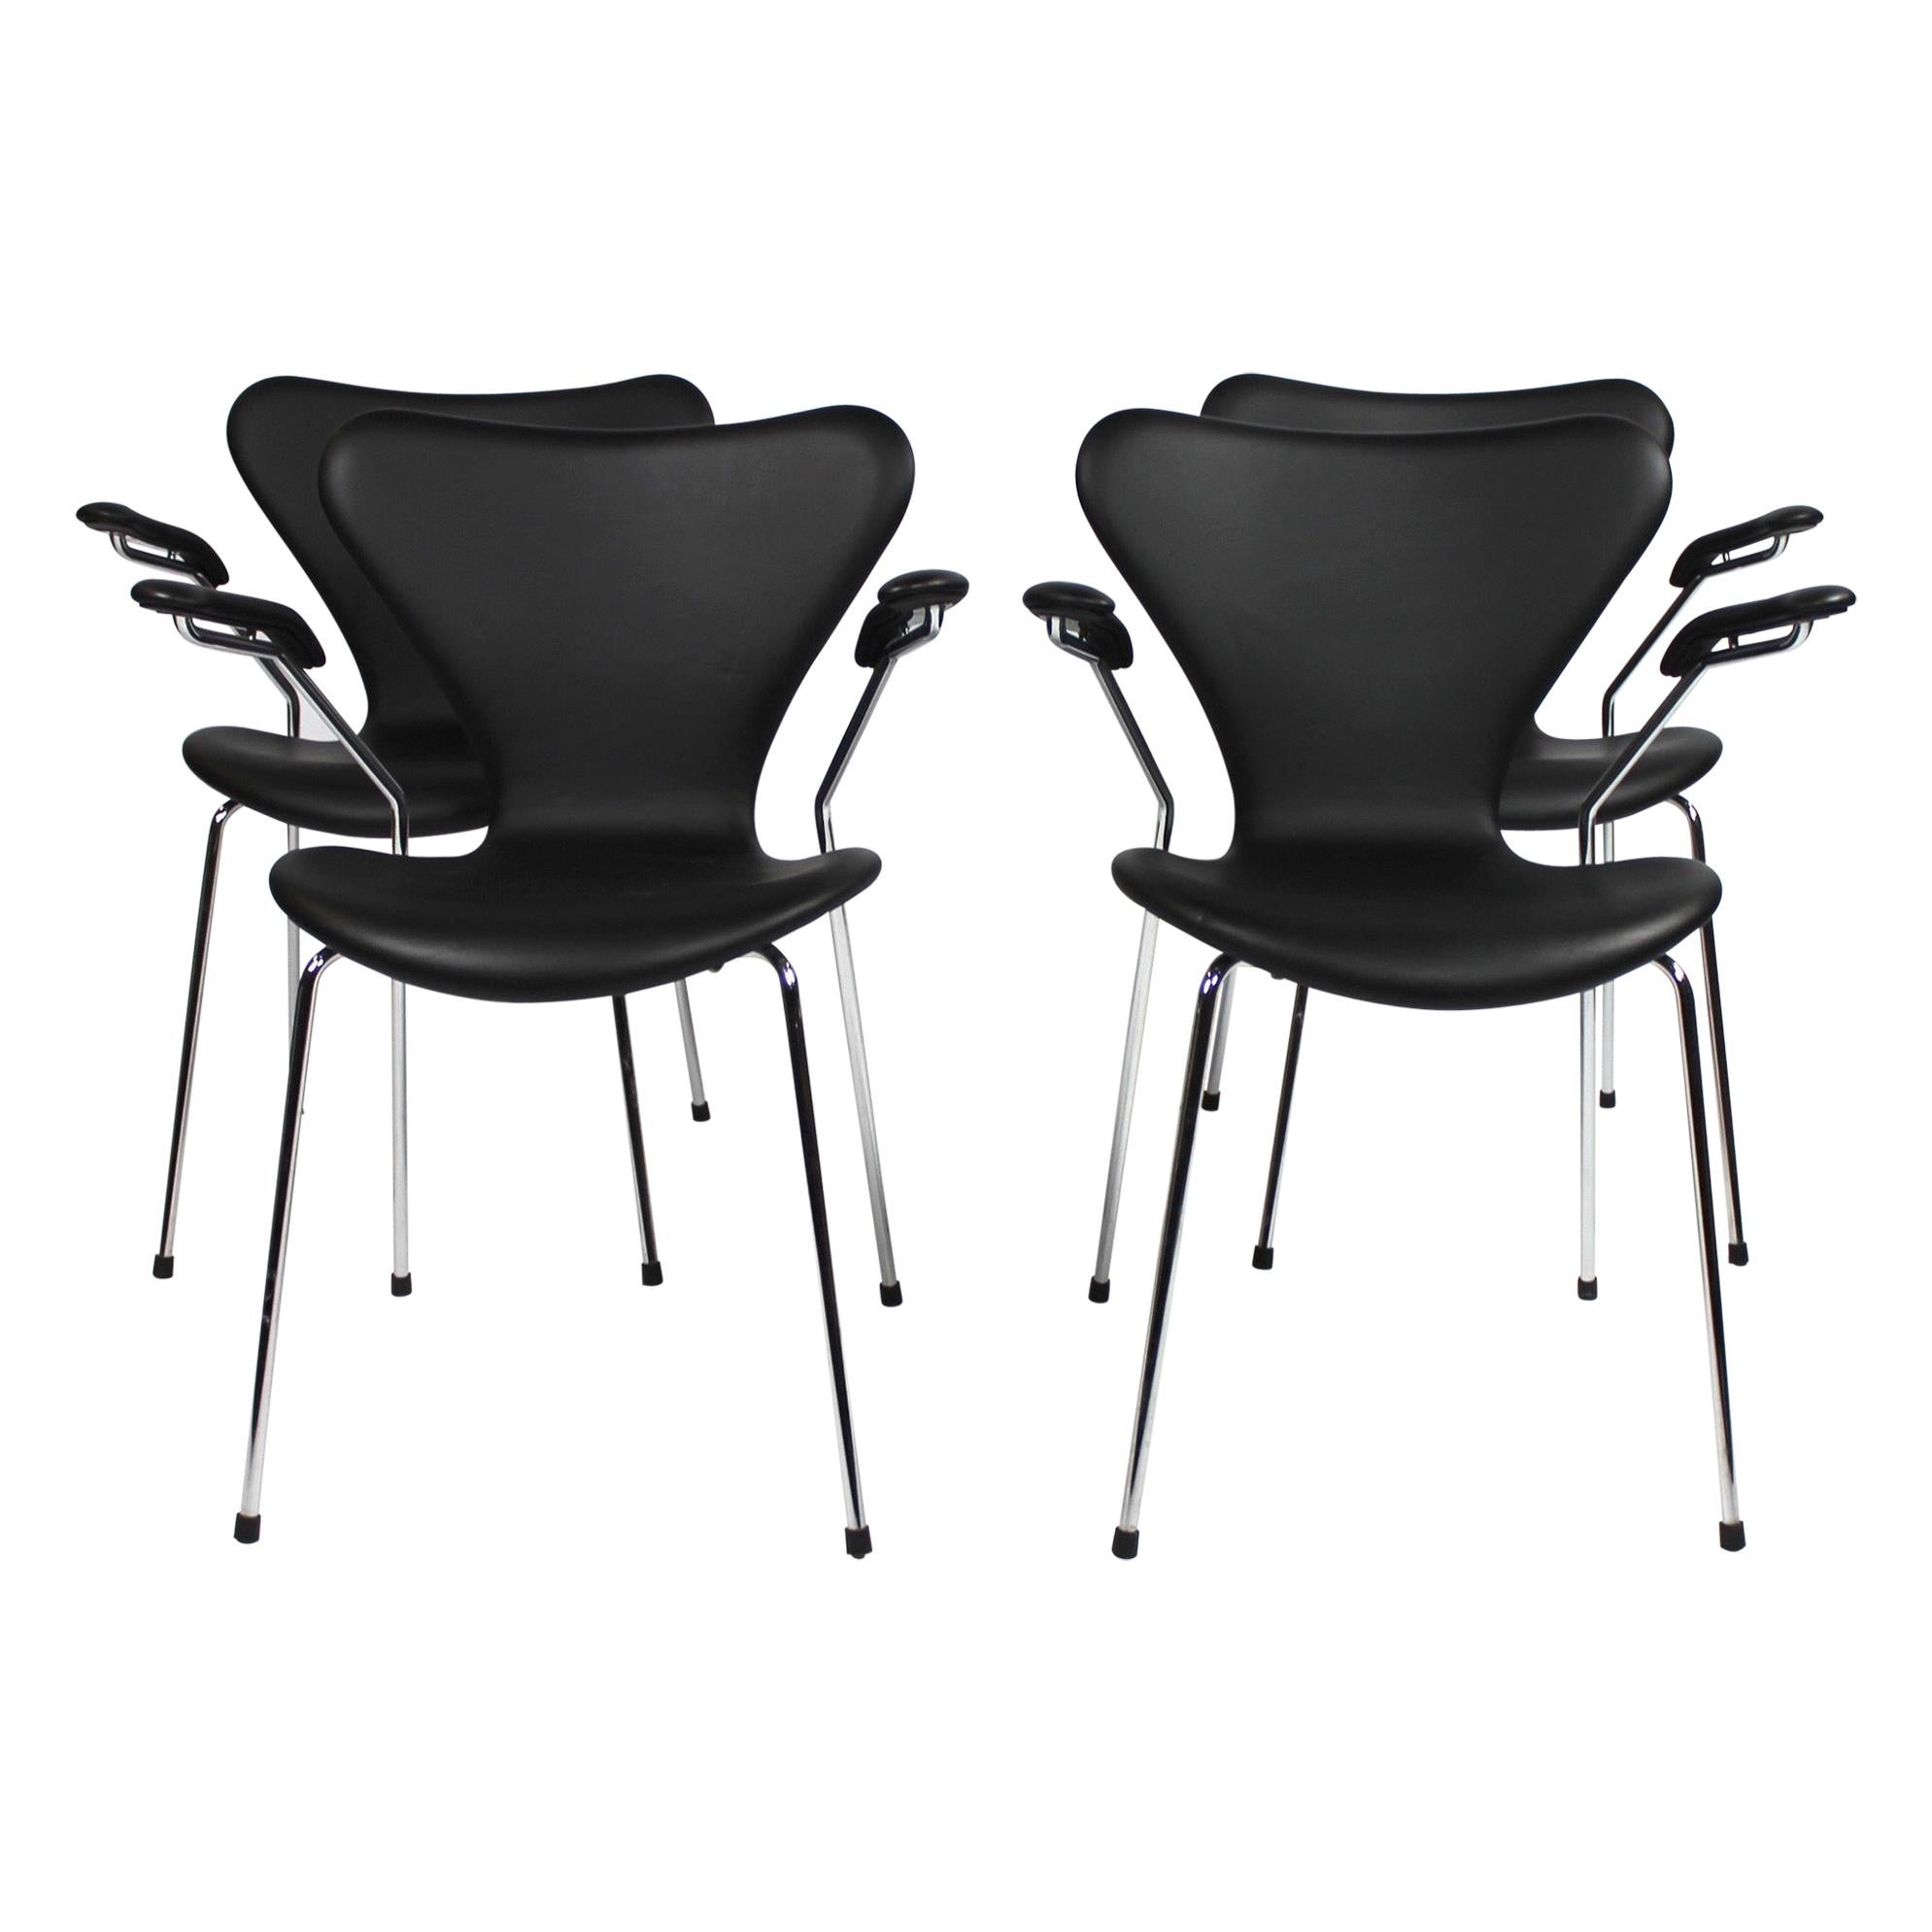 Set of Four Series 7 chairs, Model 3207, with Armrests by Arne Jacobsen, 2016 For Sale